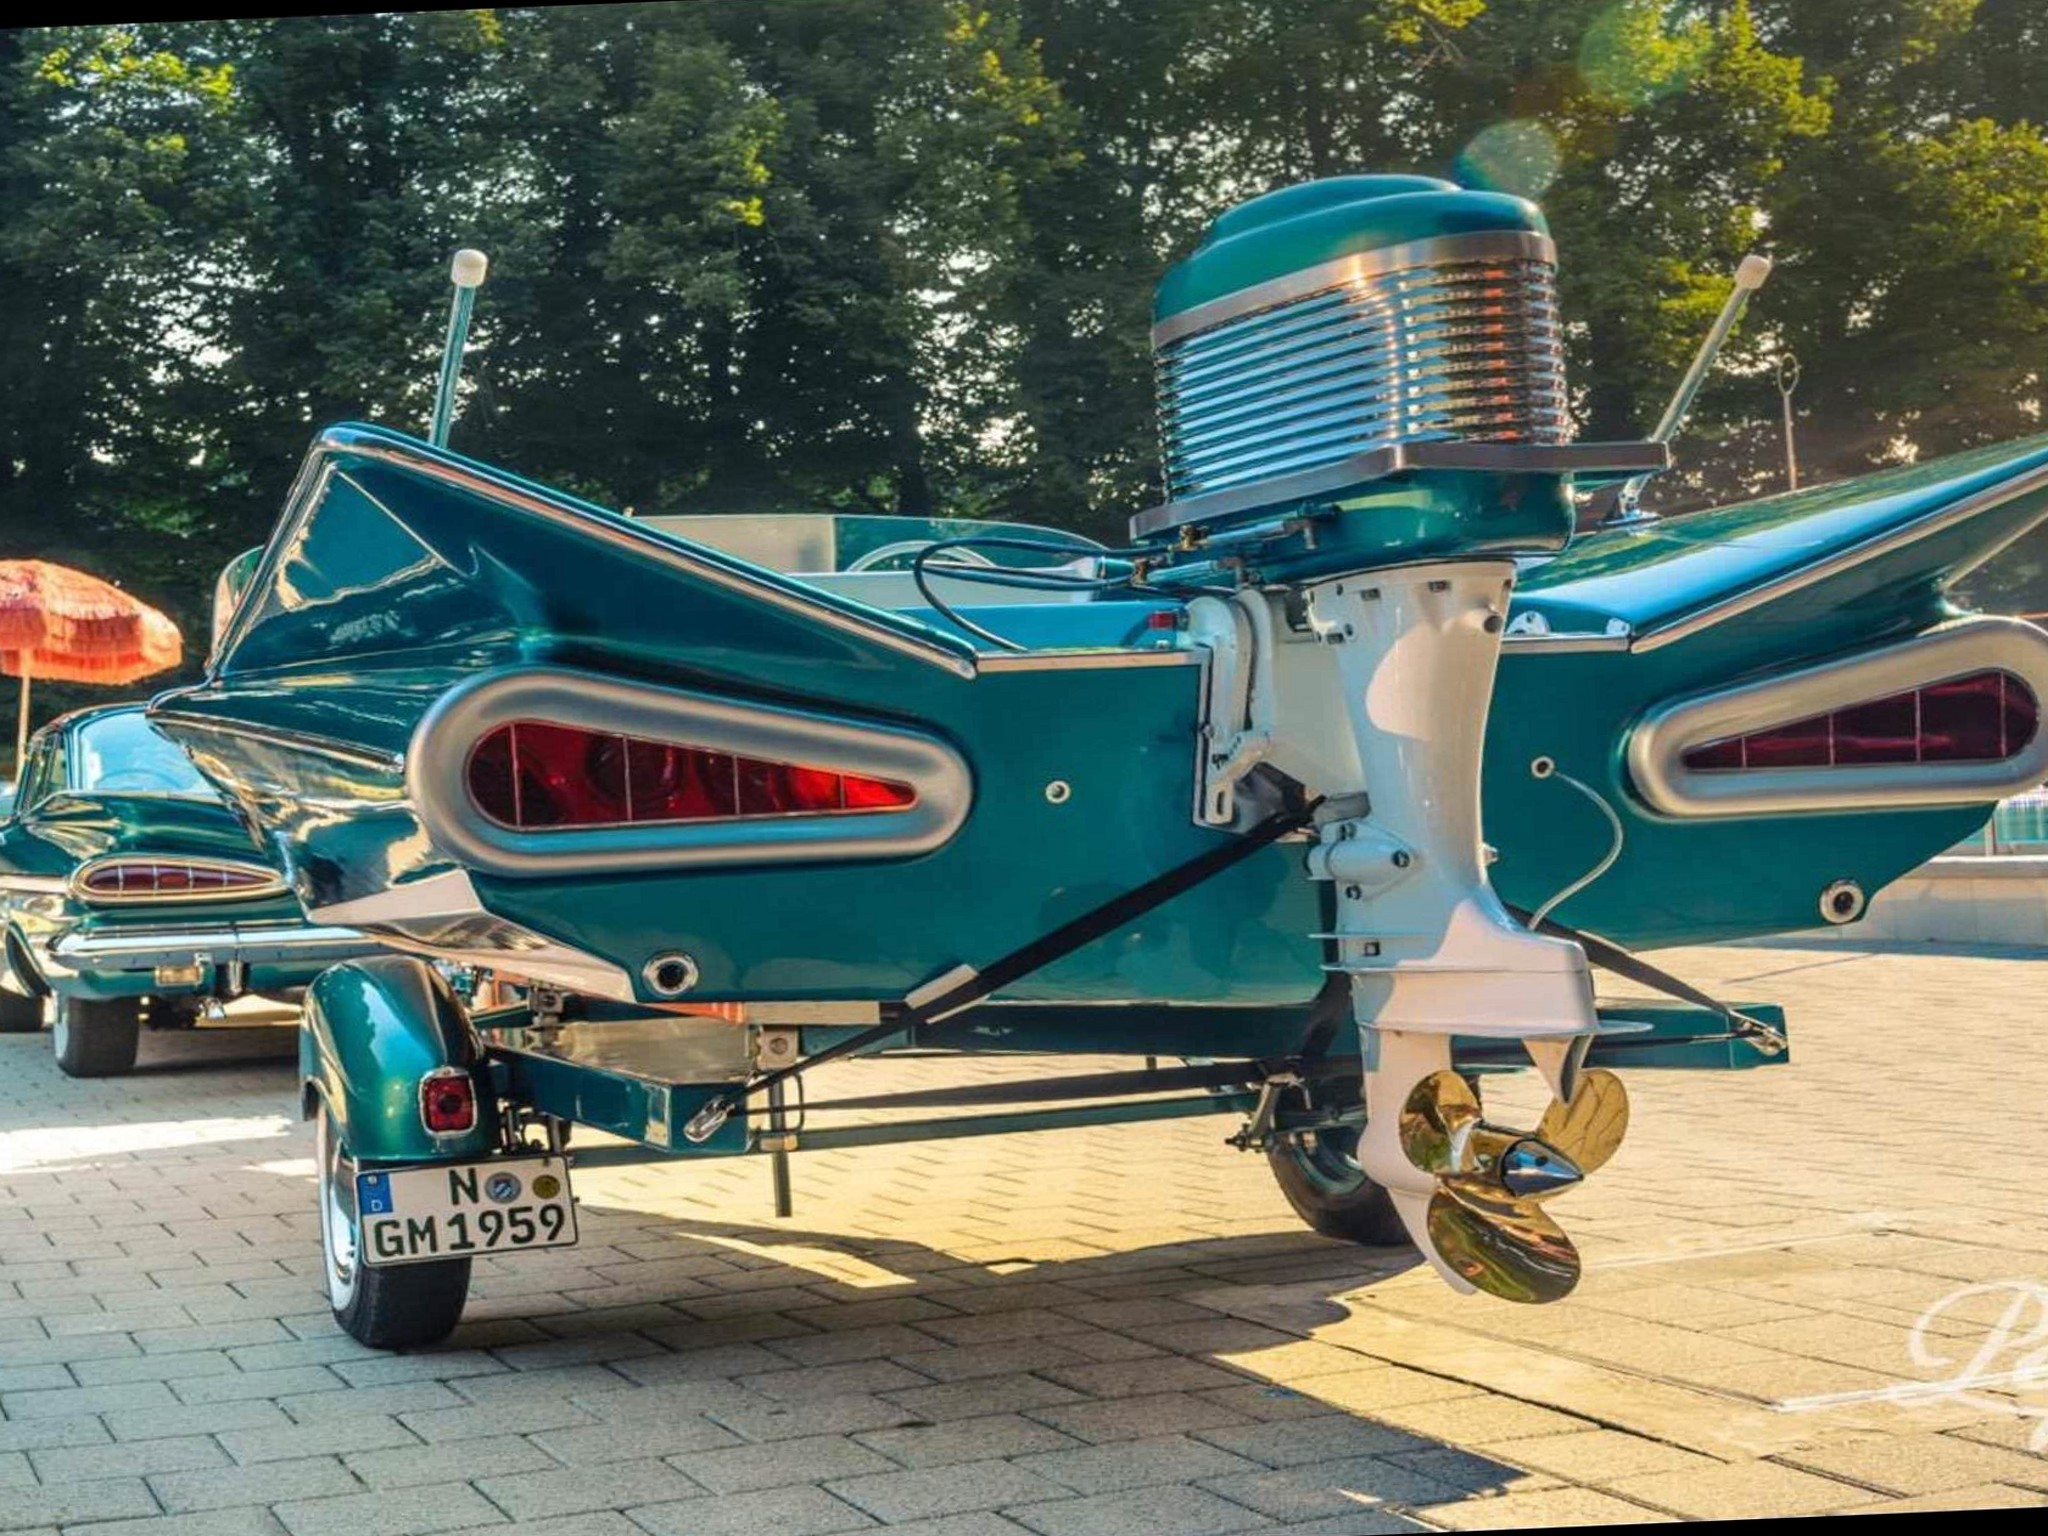 1958 Chevy Impala with matching motor boat.jpg